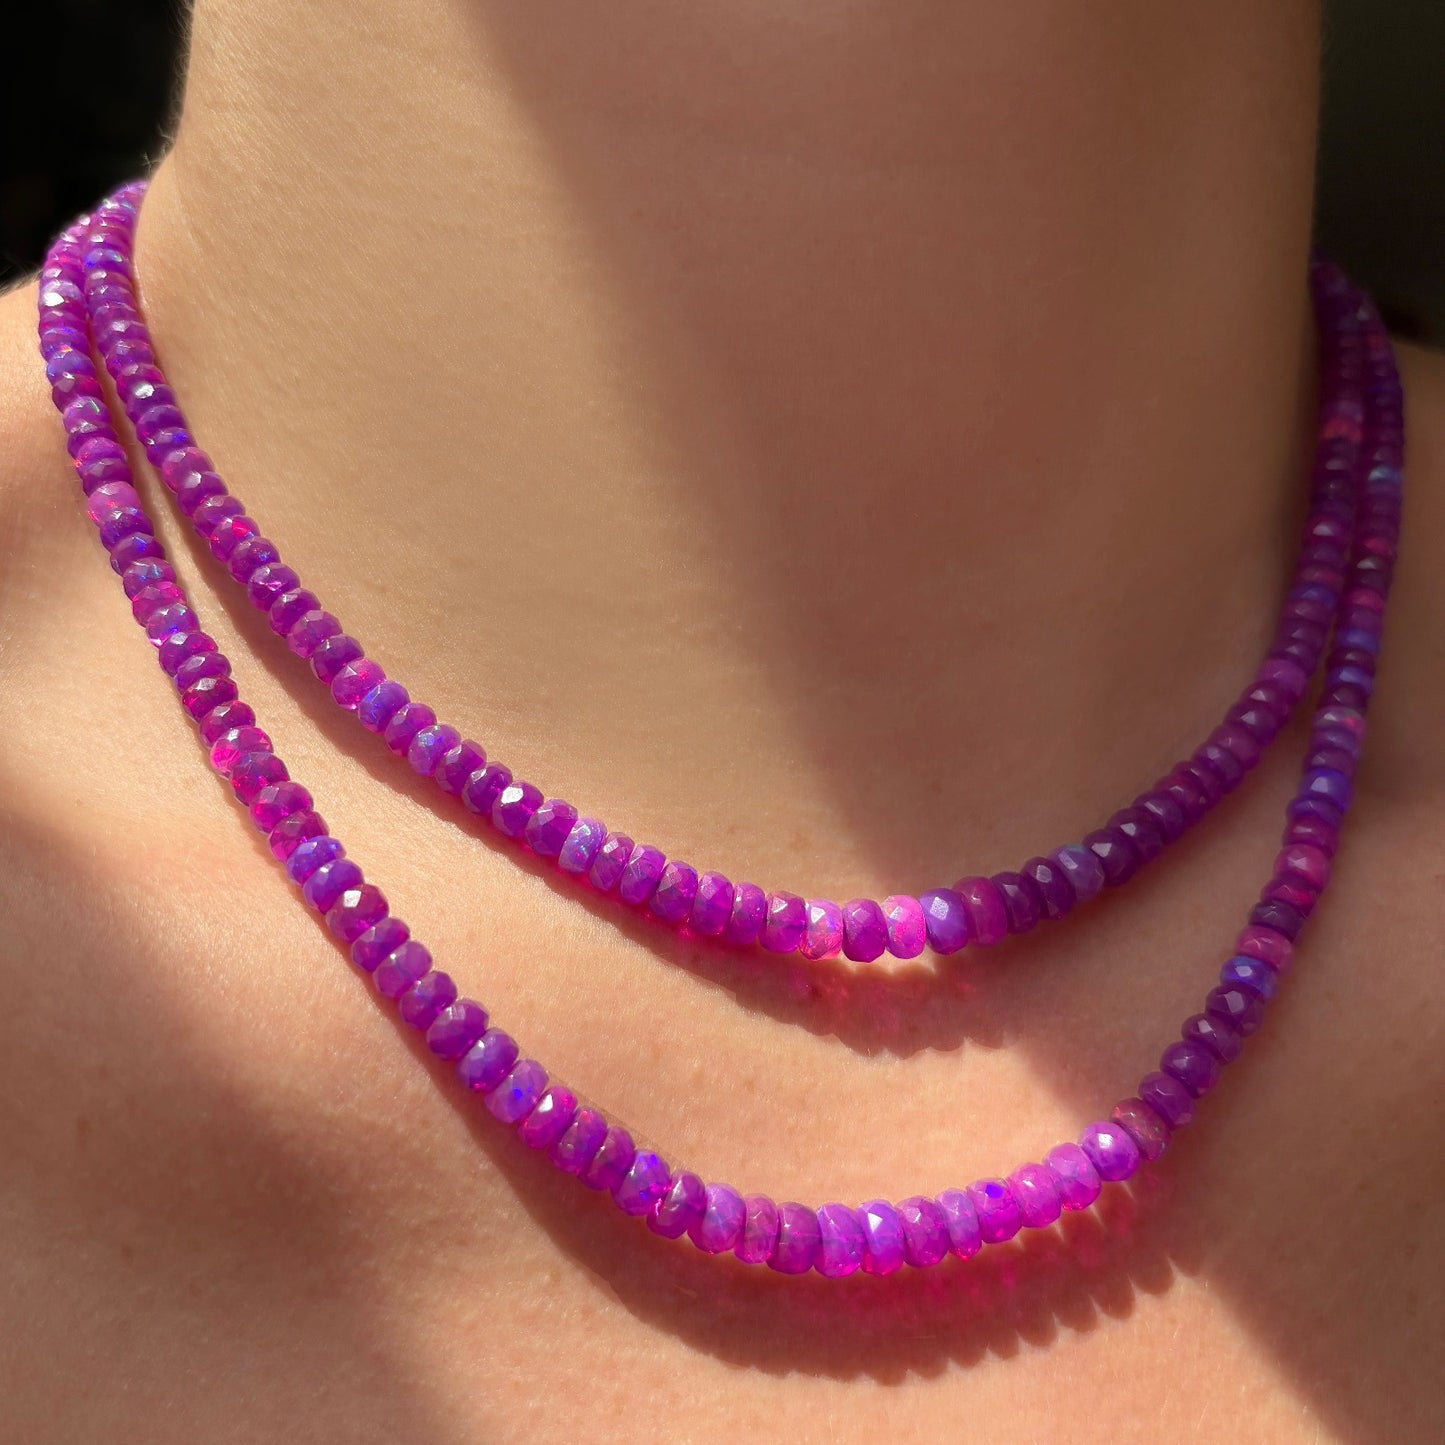 Shimmering beaded necklace made of faceted opals in shades of fuchsia pink on a gold linking ovals clasp. 